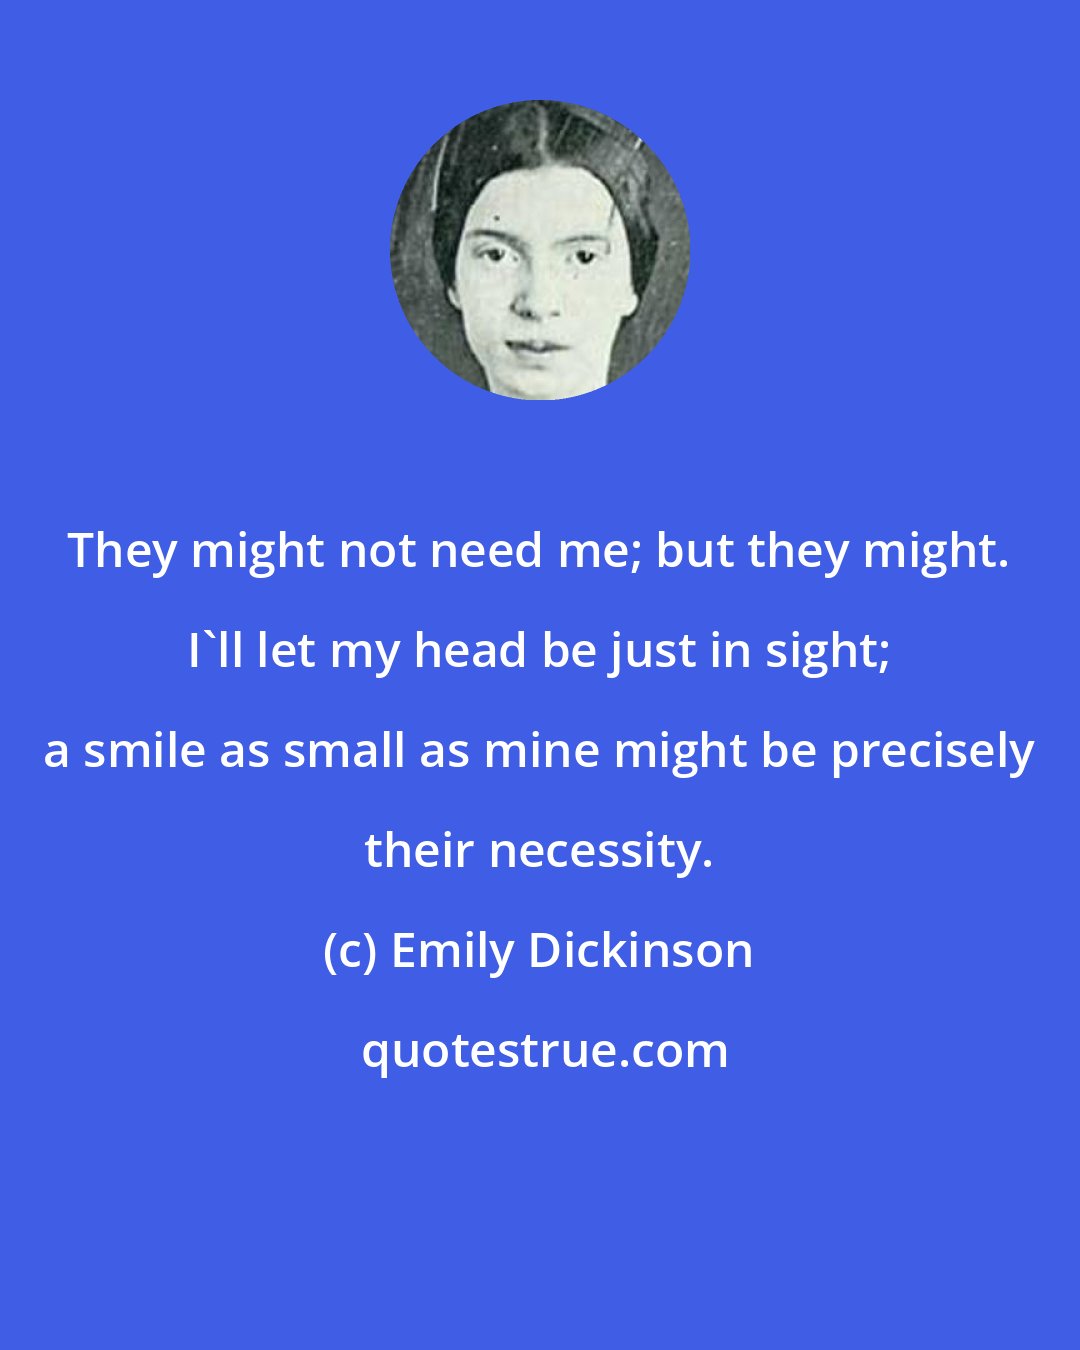 Emily Dickinson: They might not need me; but they might. I'll let my head be just in sight; a smile as small as mine might be precisely their necessity.